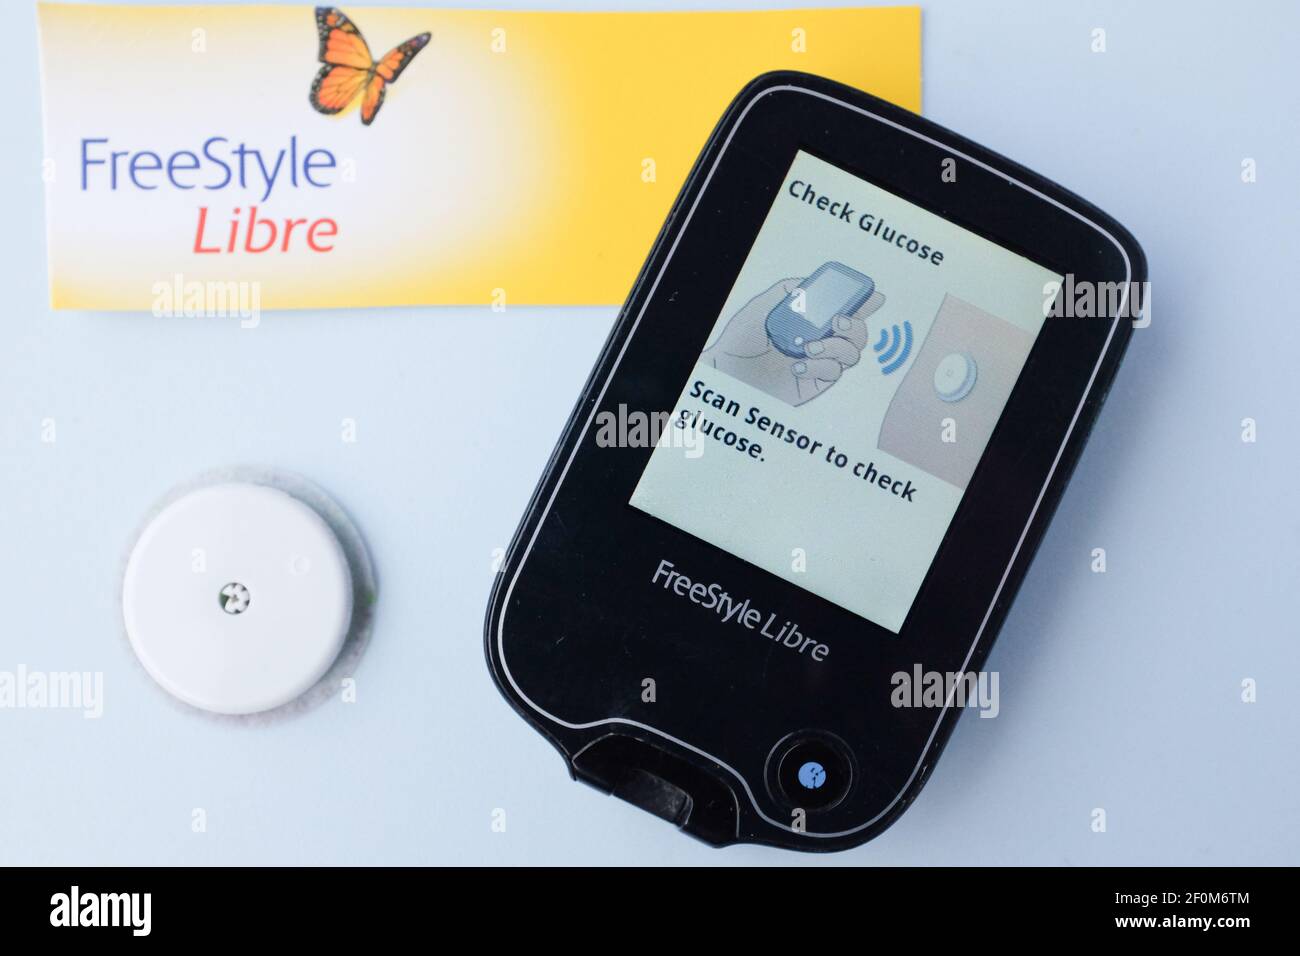 A Freestyle Libre Flash Glucose Sensor And Reader The Device Usually Worn On The Upper Arm Helps People With Type 1 Diabetes Monitor Their Blood Sugar Levels Each Sensor Last 14 Days